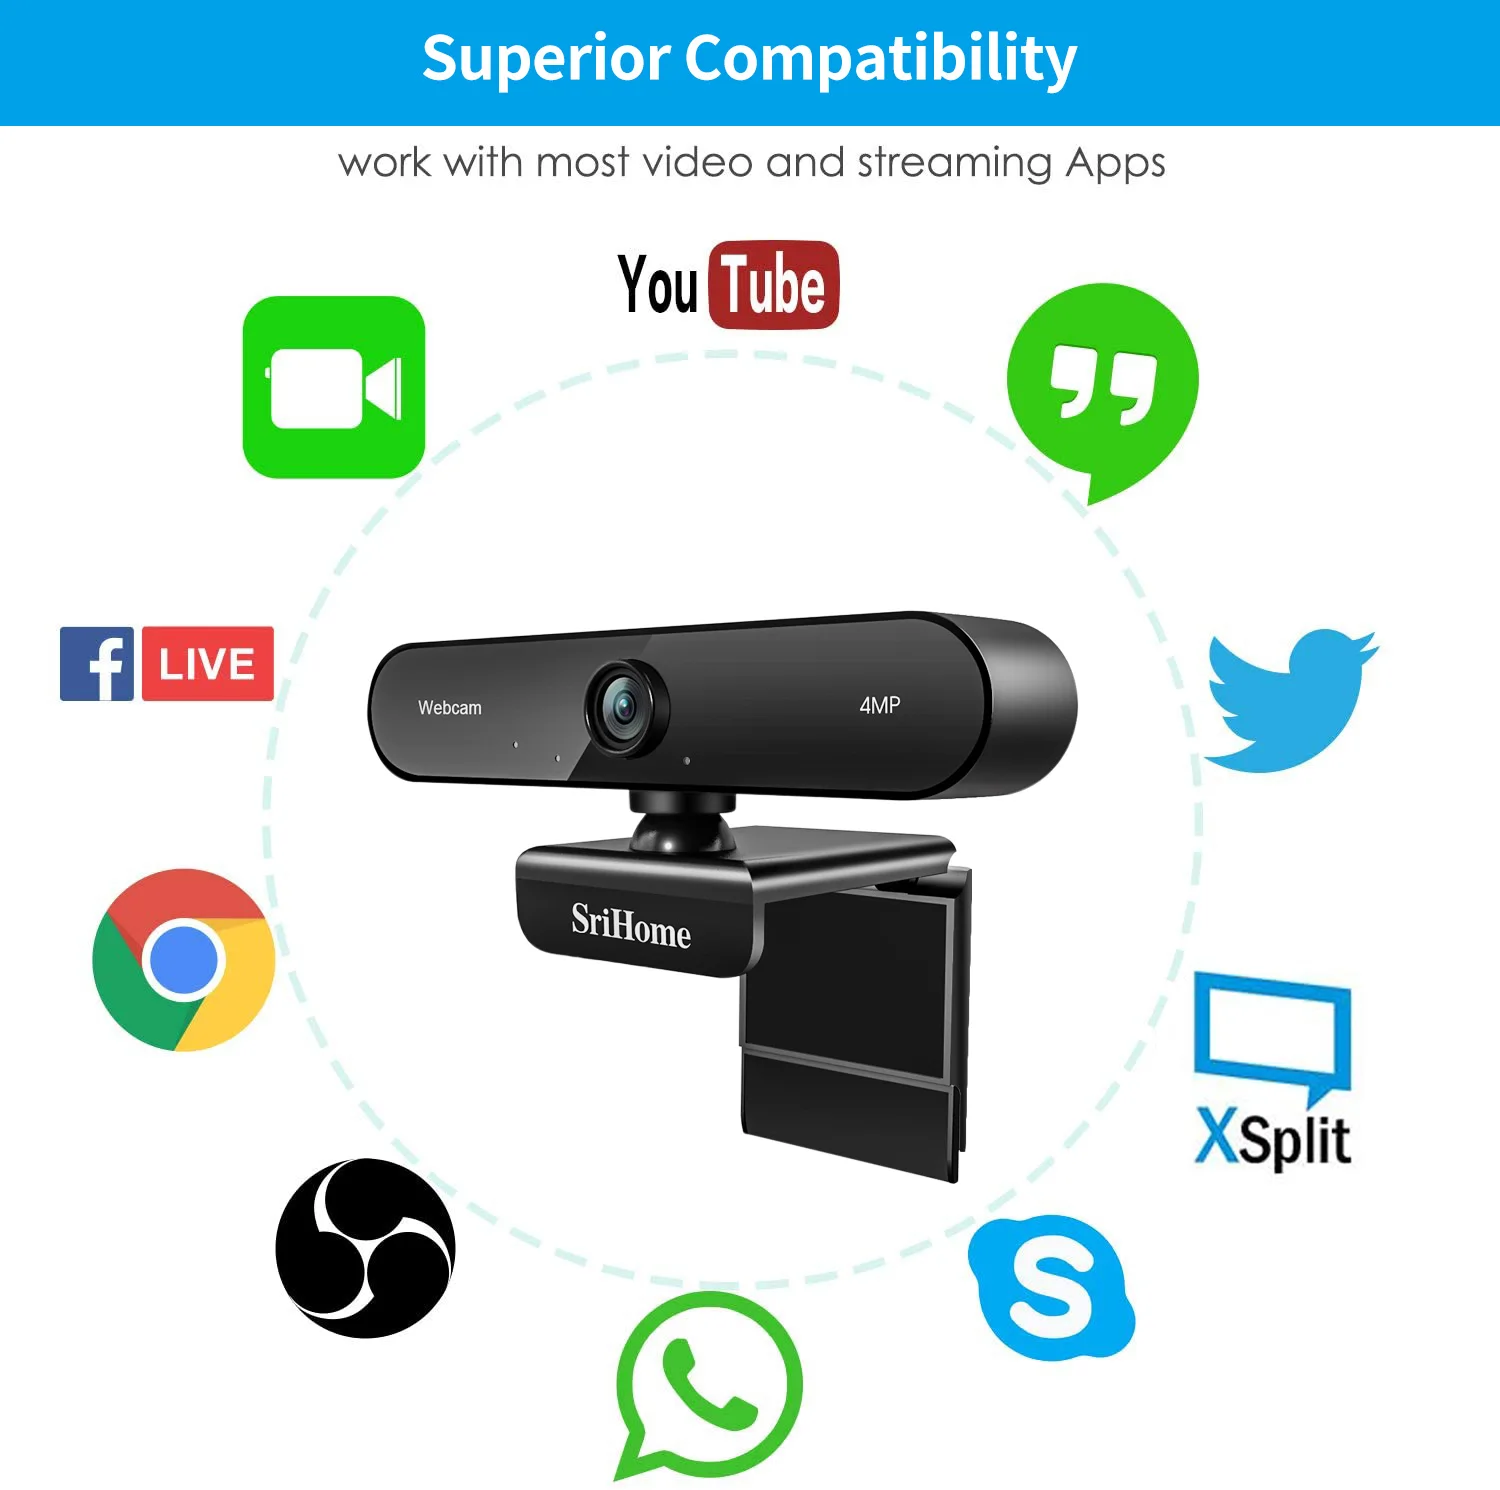 Srihome SH002 4MP Full HD PC Web Cam with Microphone Video Calling and Recording for Computer Laptop Desktop